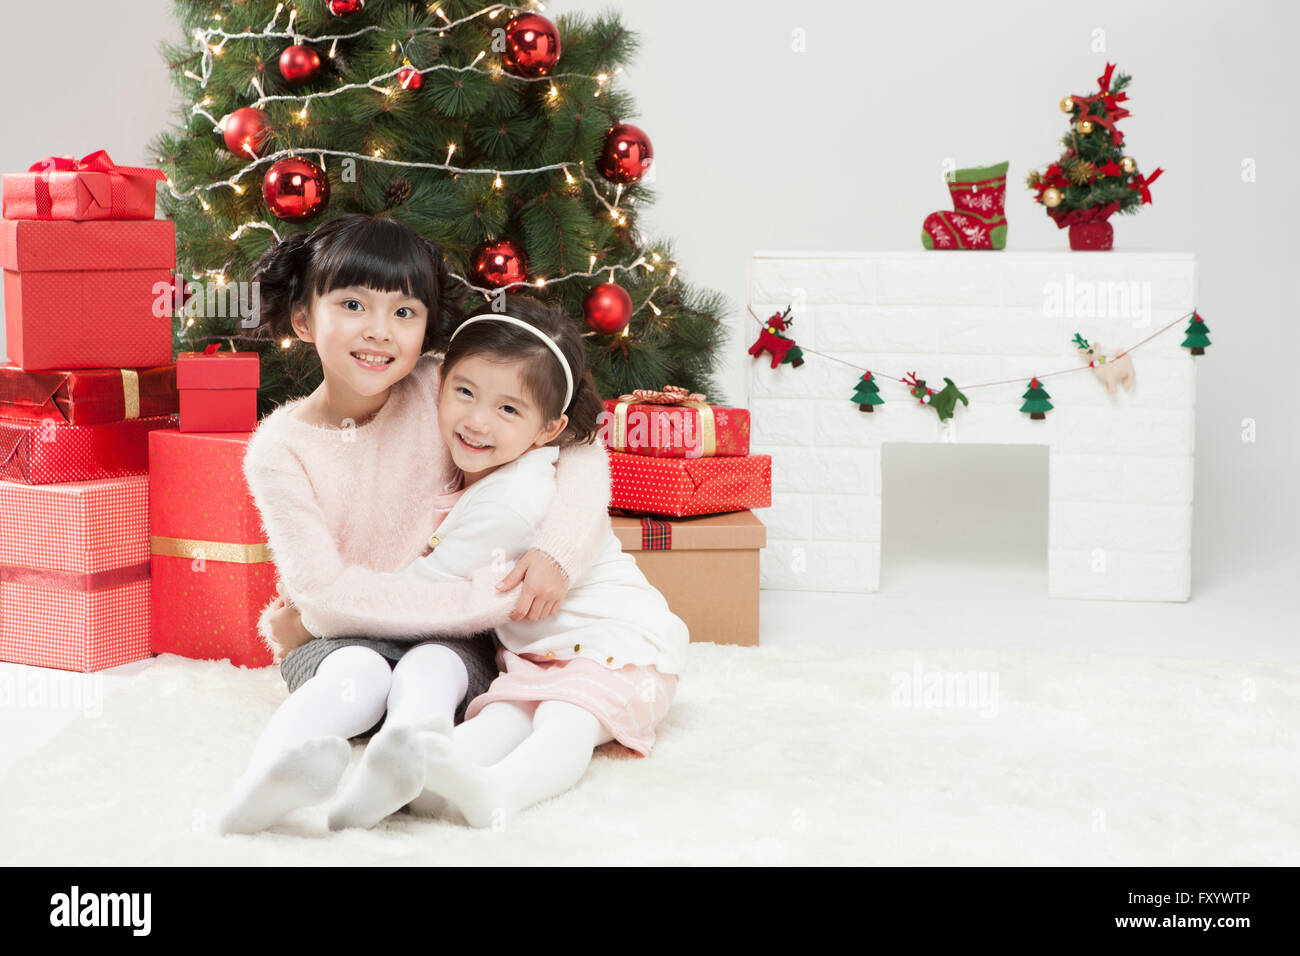 Two smiling girls sitting down hugging each other with stacked present boxes, Christmas tree and fireplace Stock Photo